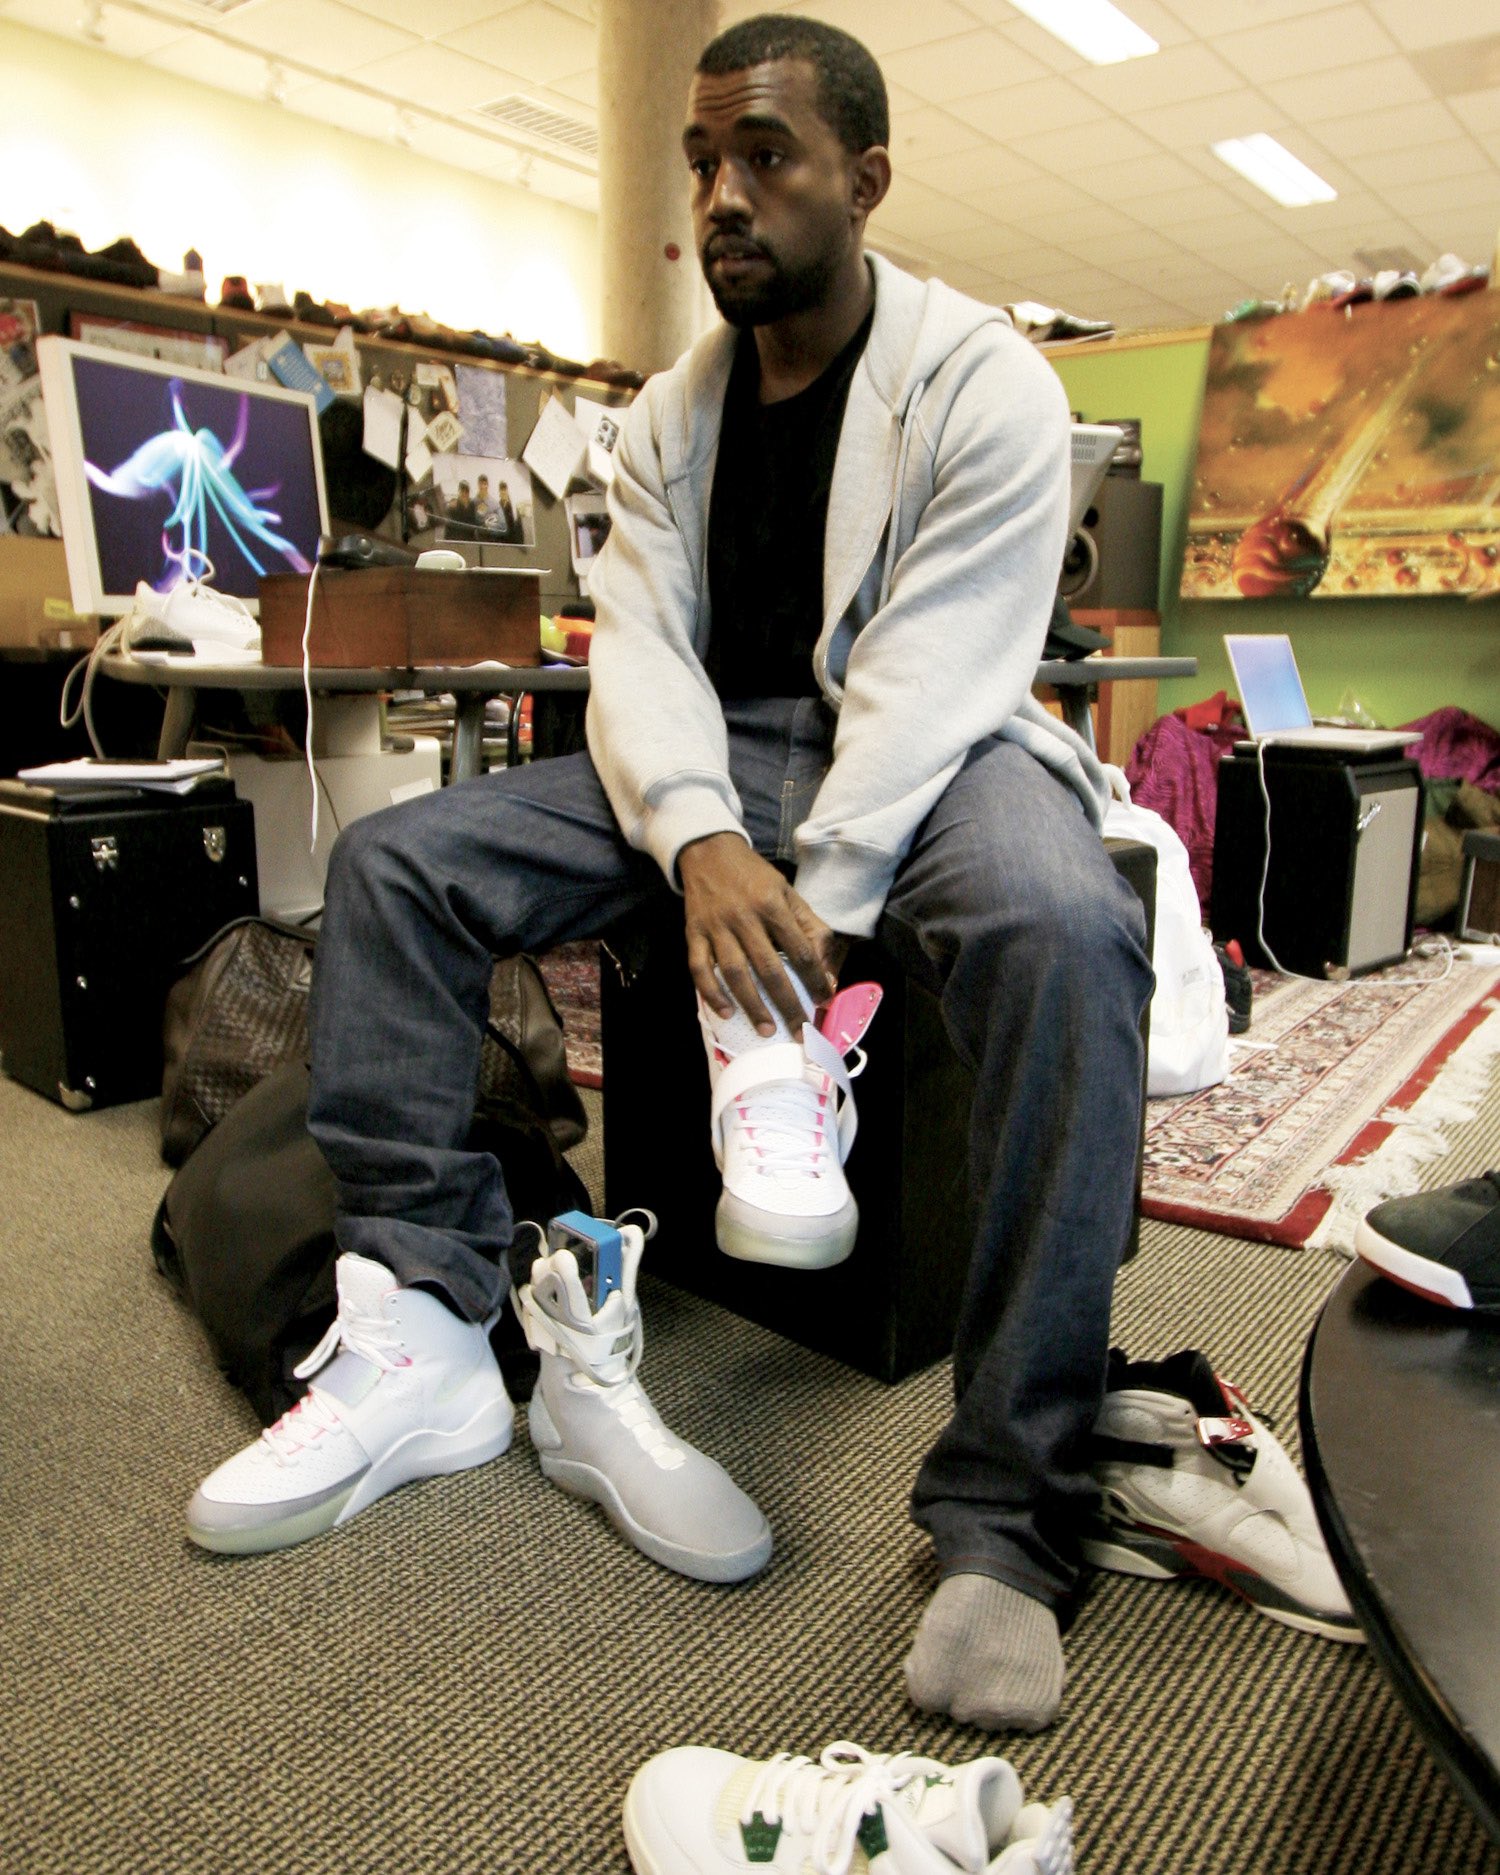 Nick DePaula on Twitter: "The Yeezy 1 process... Went down memory and pulled up some old 2007-2009 photos of Kanye working on his first Nike Air Yeezy prototypes —&gt; https://t.co/n35jSQnZwv https://t.co/zhVE2Tyf6s" /